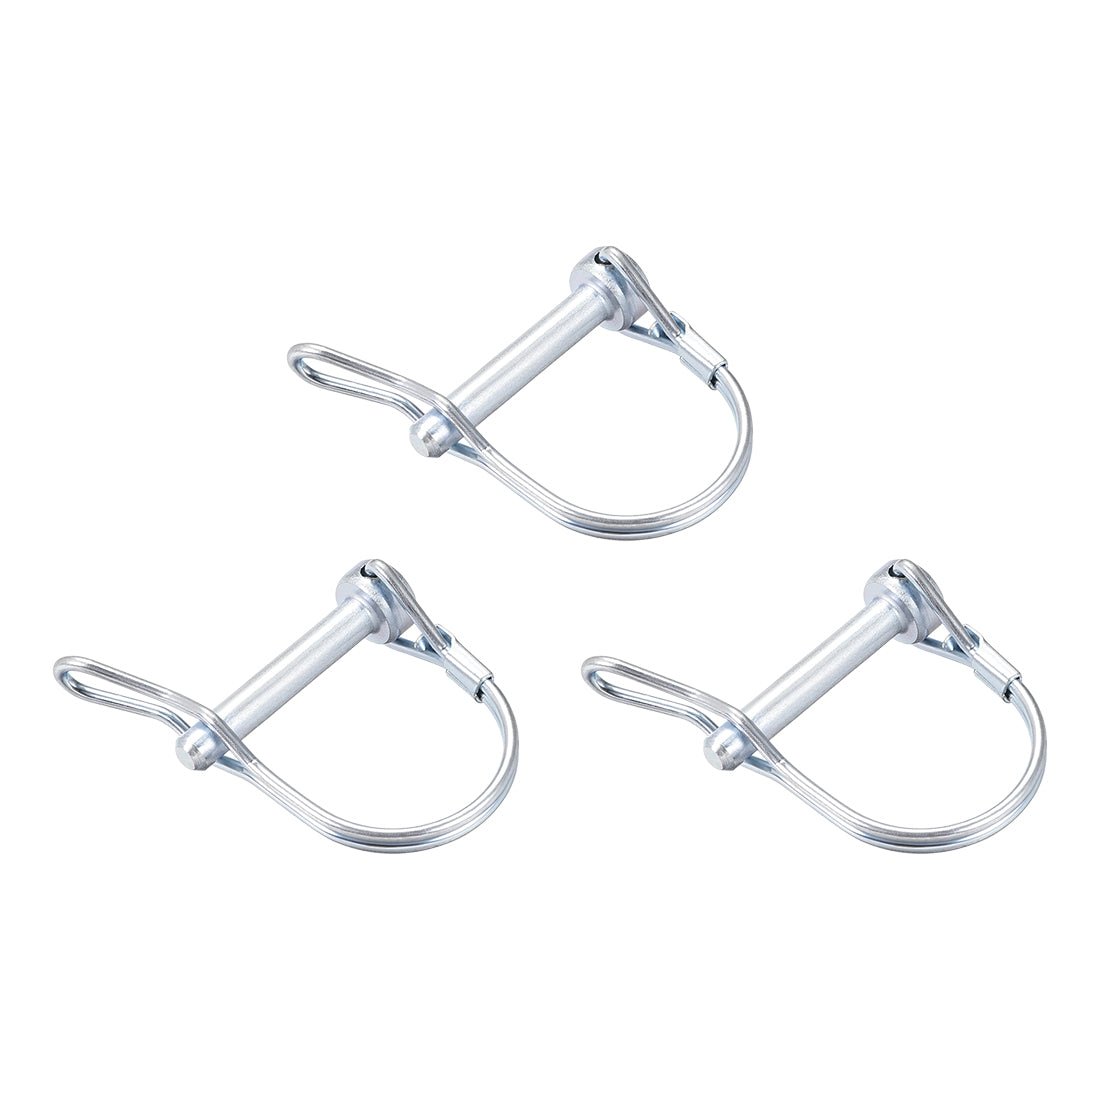 uxcell Uxcell Shaft Locking Pin w Ear 6mmx35mm Coupler Pin for Farm Trailers Lawn Arch 3Pcs